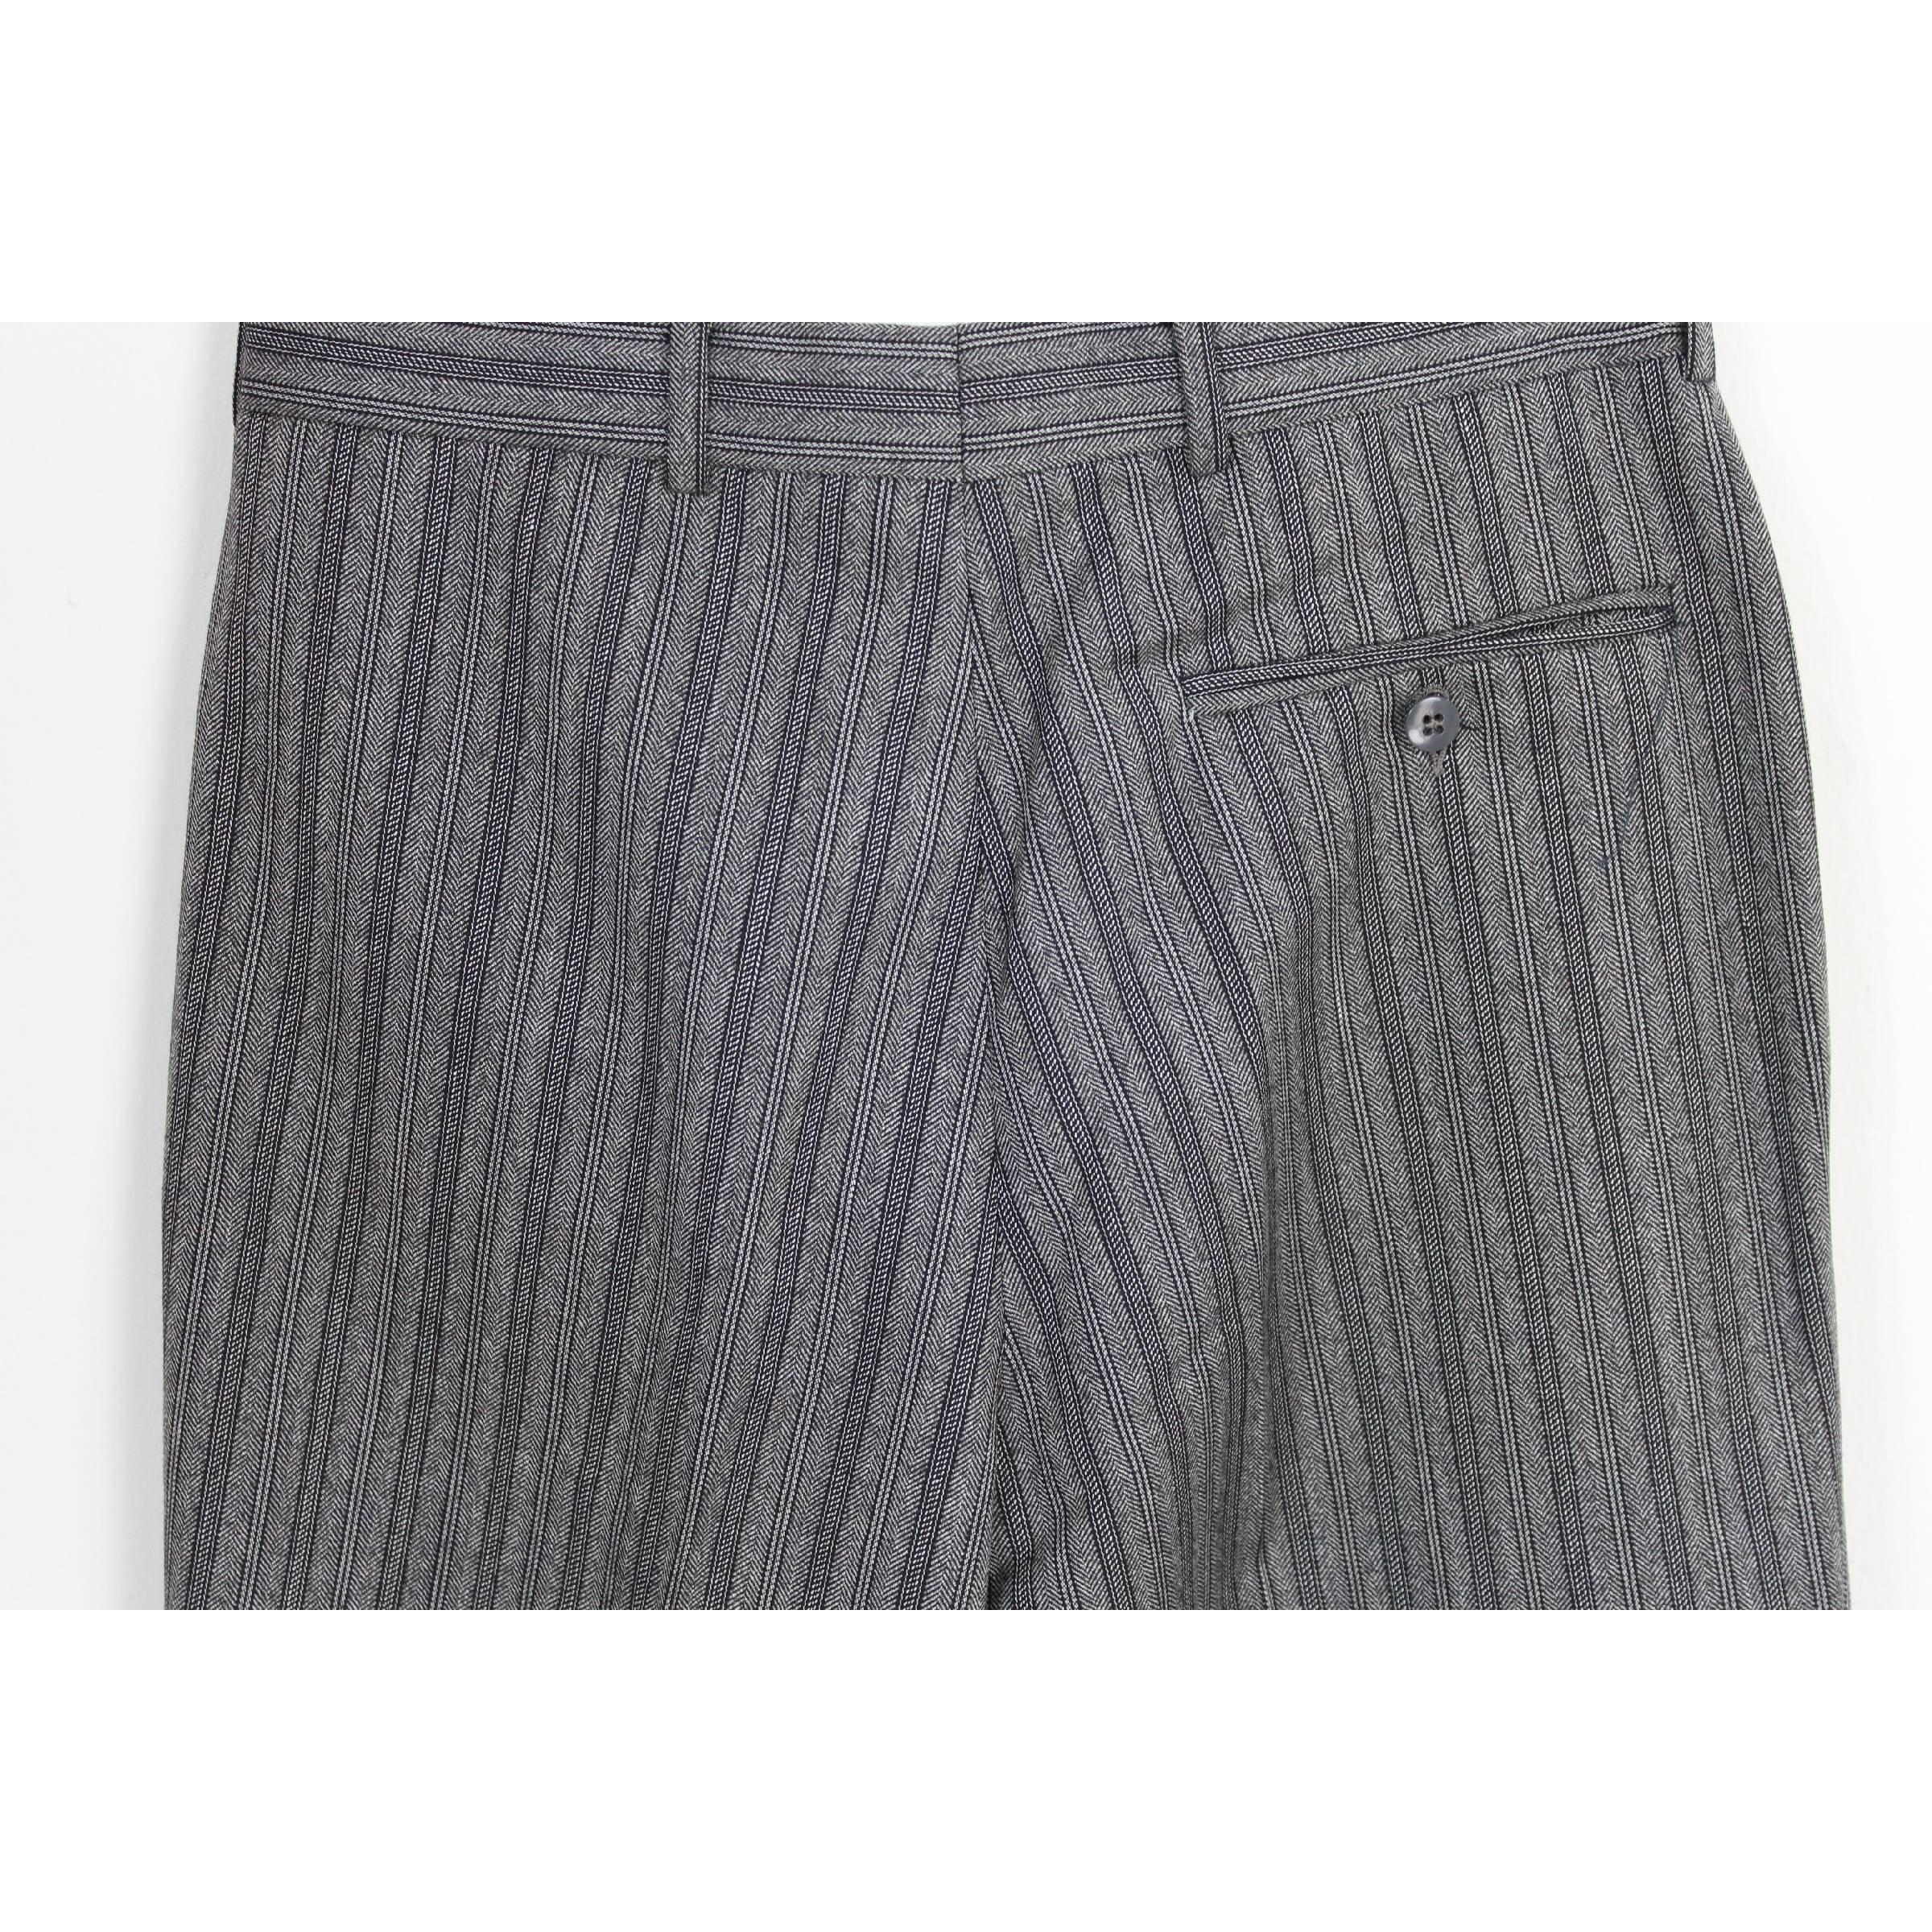 Pierre Cardin Suit Pants Gray and Black Wool France Smoking, 1990s For Sale 4